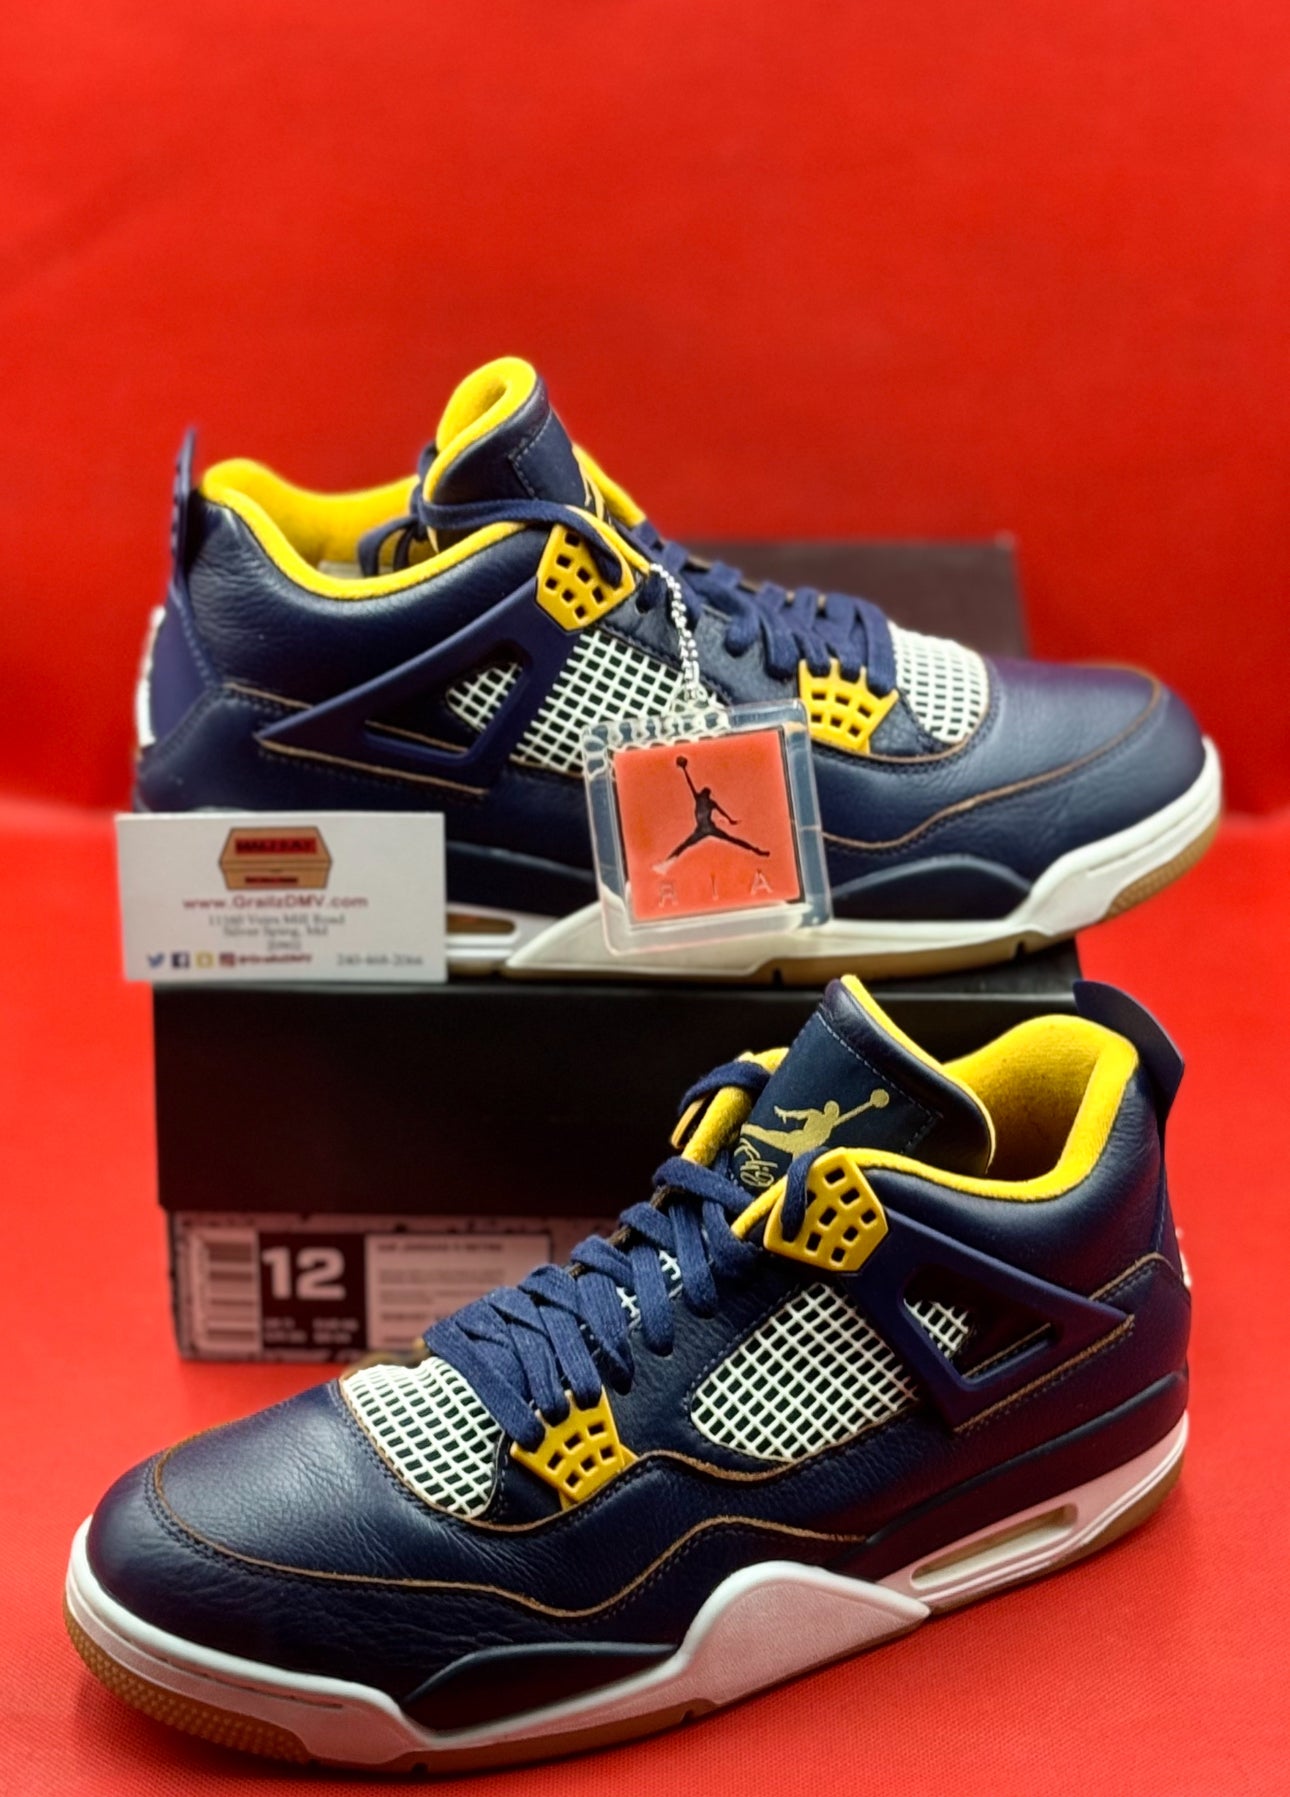 Dunk From Above 4s Size 12